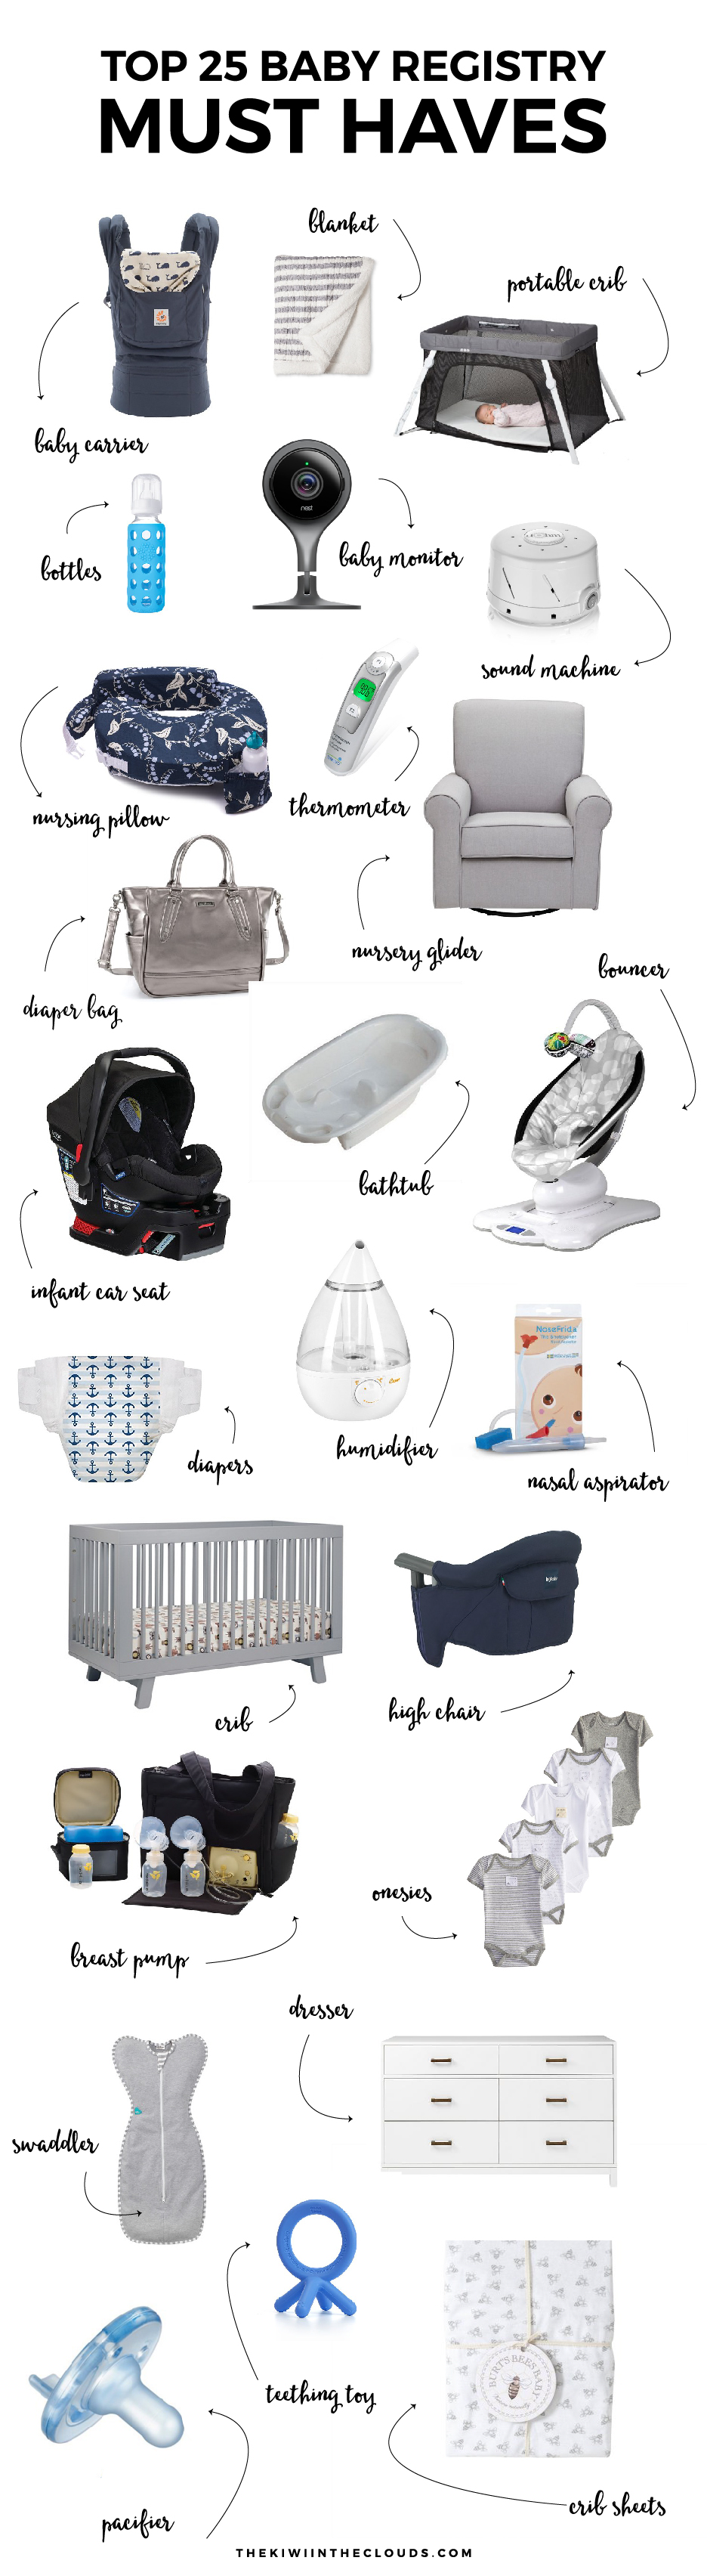 https://www.bellybrief.com/beta/wp-content/uploads/2017/10/the-top-baby-registry-must-haves-every-mom-to-be-needs-1507837346l48cp.jpg